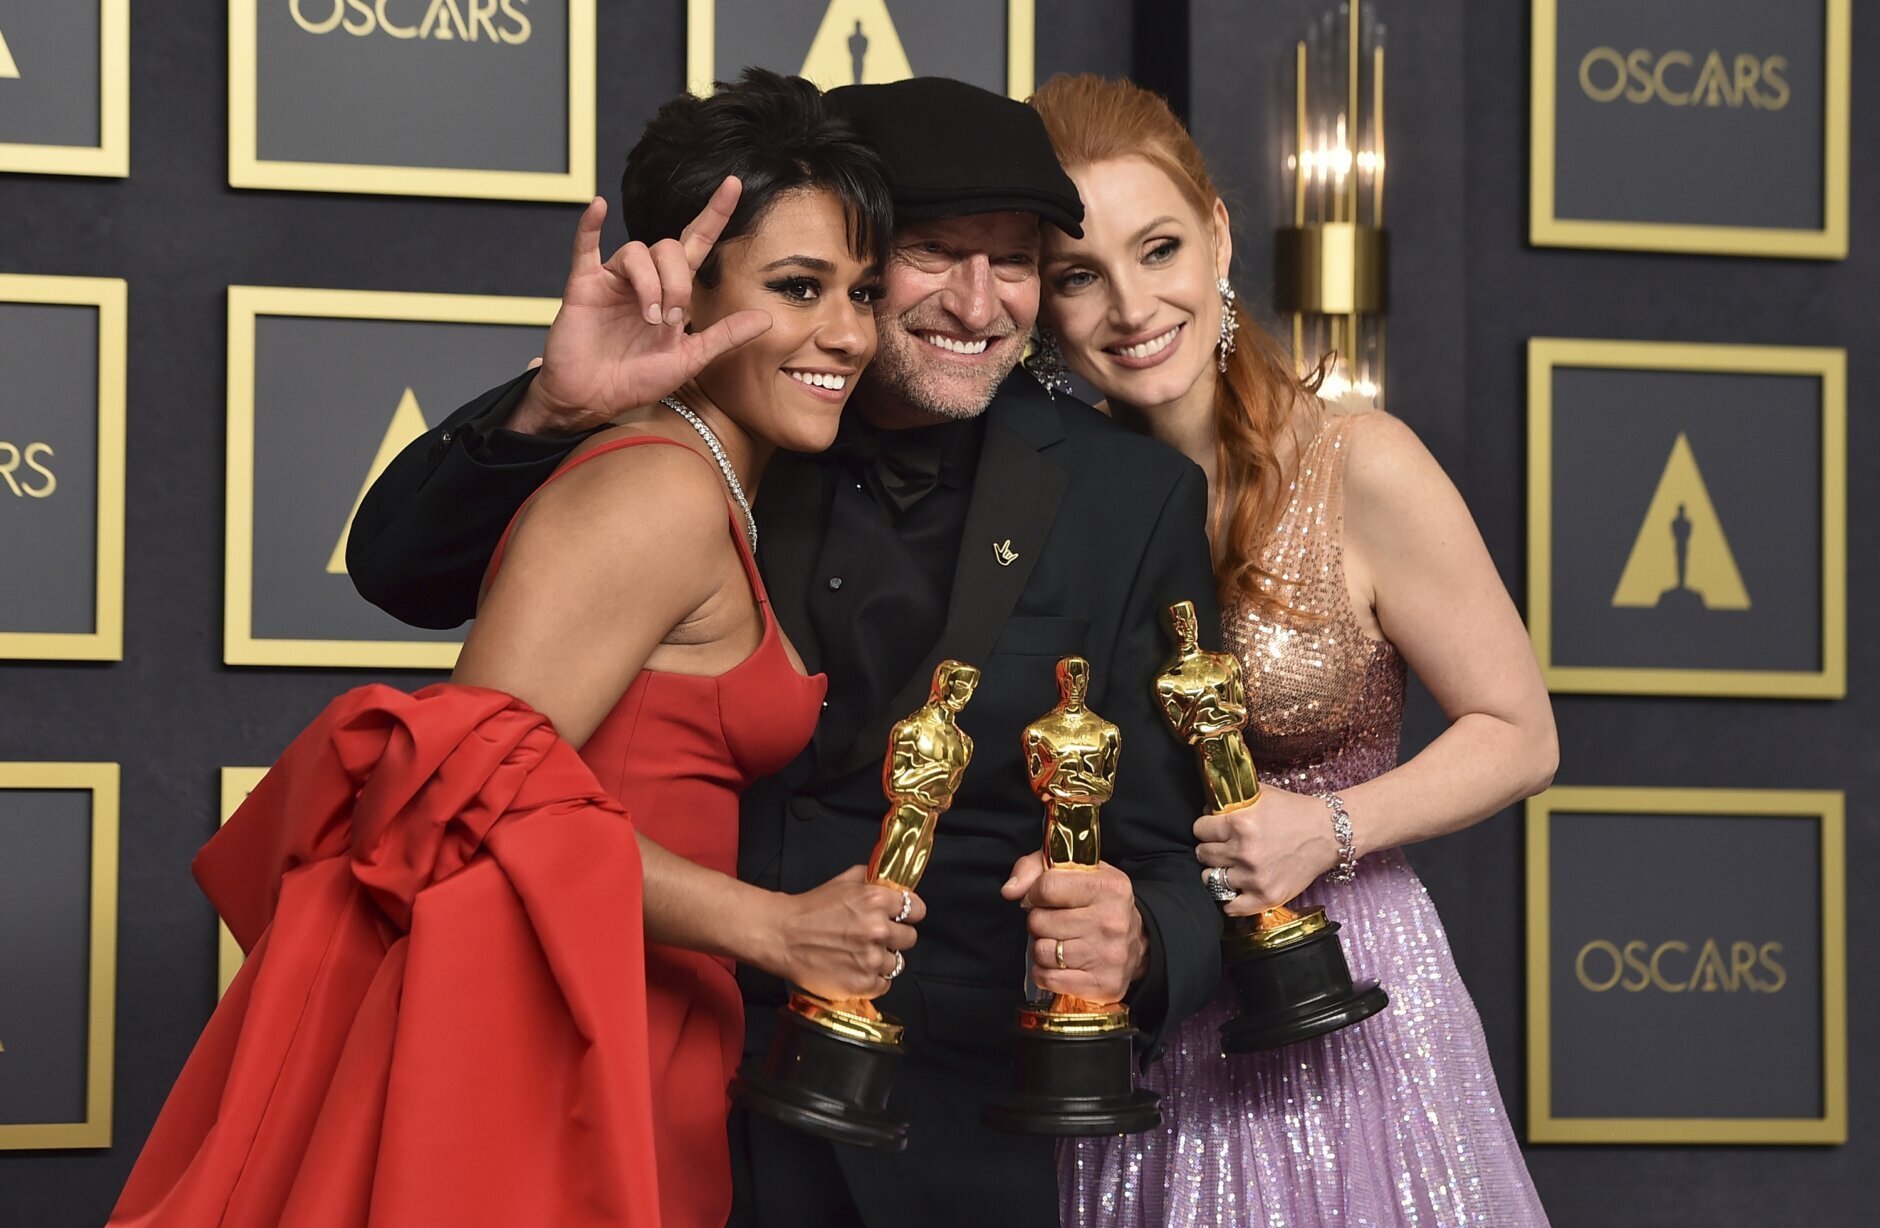 Ariana DeBose, from left, winner of the award for best performance by an actress in a supporting role for "West Side Story, Troy Kotsur, winner of the award for best performance by an actor in a supporting role for "CODA", and Jessica Chastain, winner of the award for best performance by an actress in a leading role for "The Eyes of Tammy Faye," pose in the press room at the Oscars on Sunday, March 27, 2022, at the Dolby Theatre in Los Angeles. (Photo by Jordan Strauss/Invision/AP)